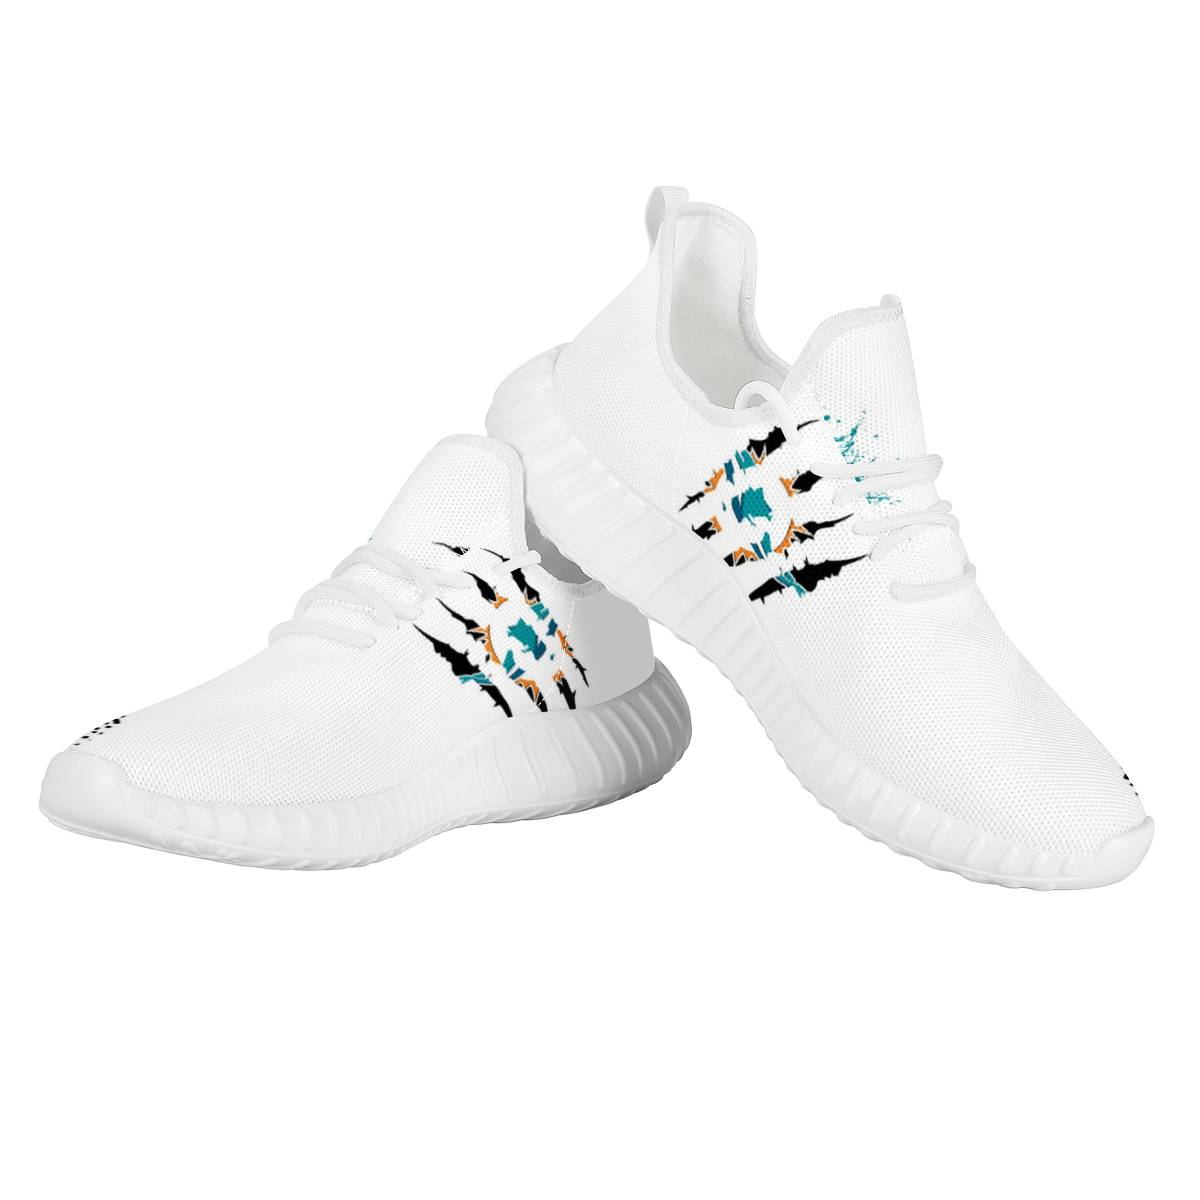 Women's Miami Dolphins Mesh Knit Sneakers/Shoes 011